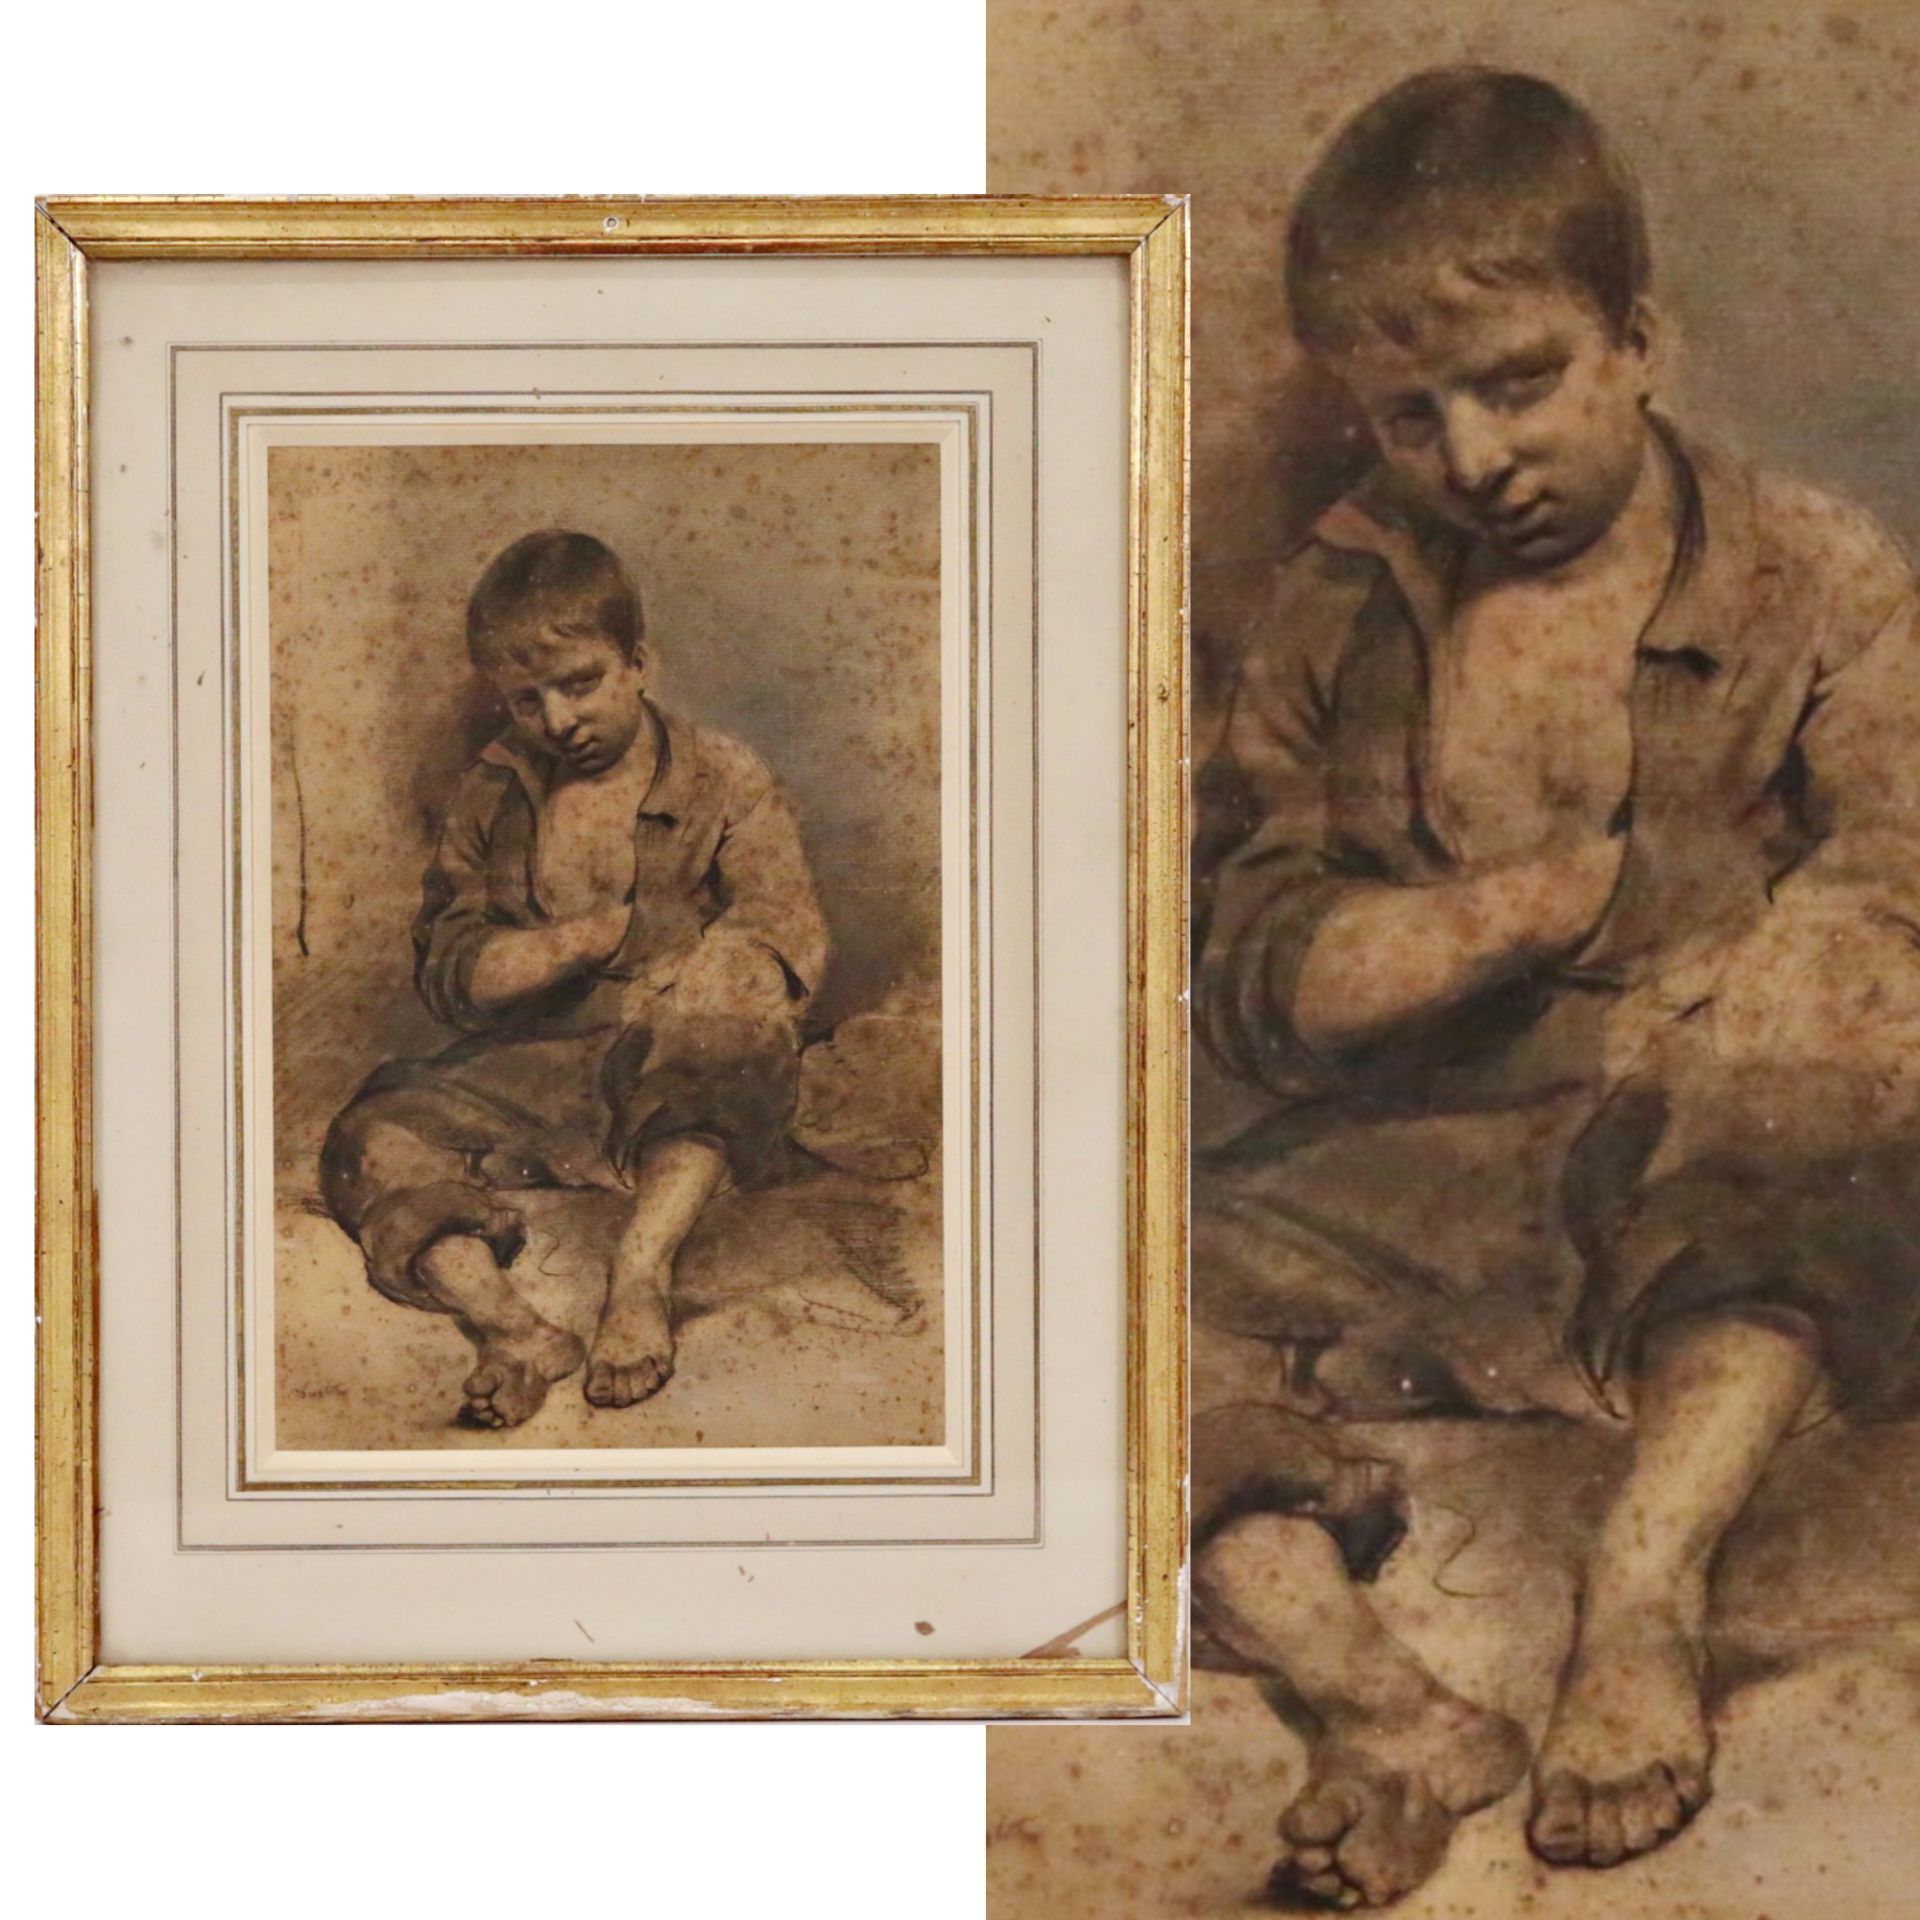 Frantz CHARLET (1862 Belgium -1928) "Seated child", European painting of the 19th-20th century.